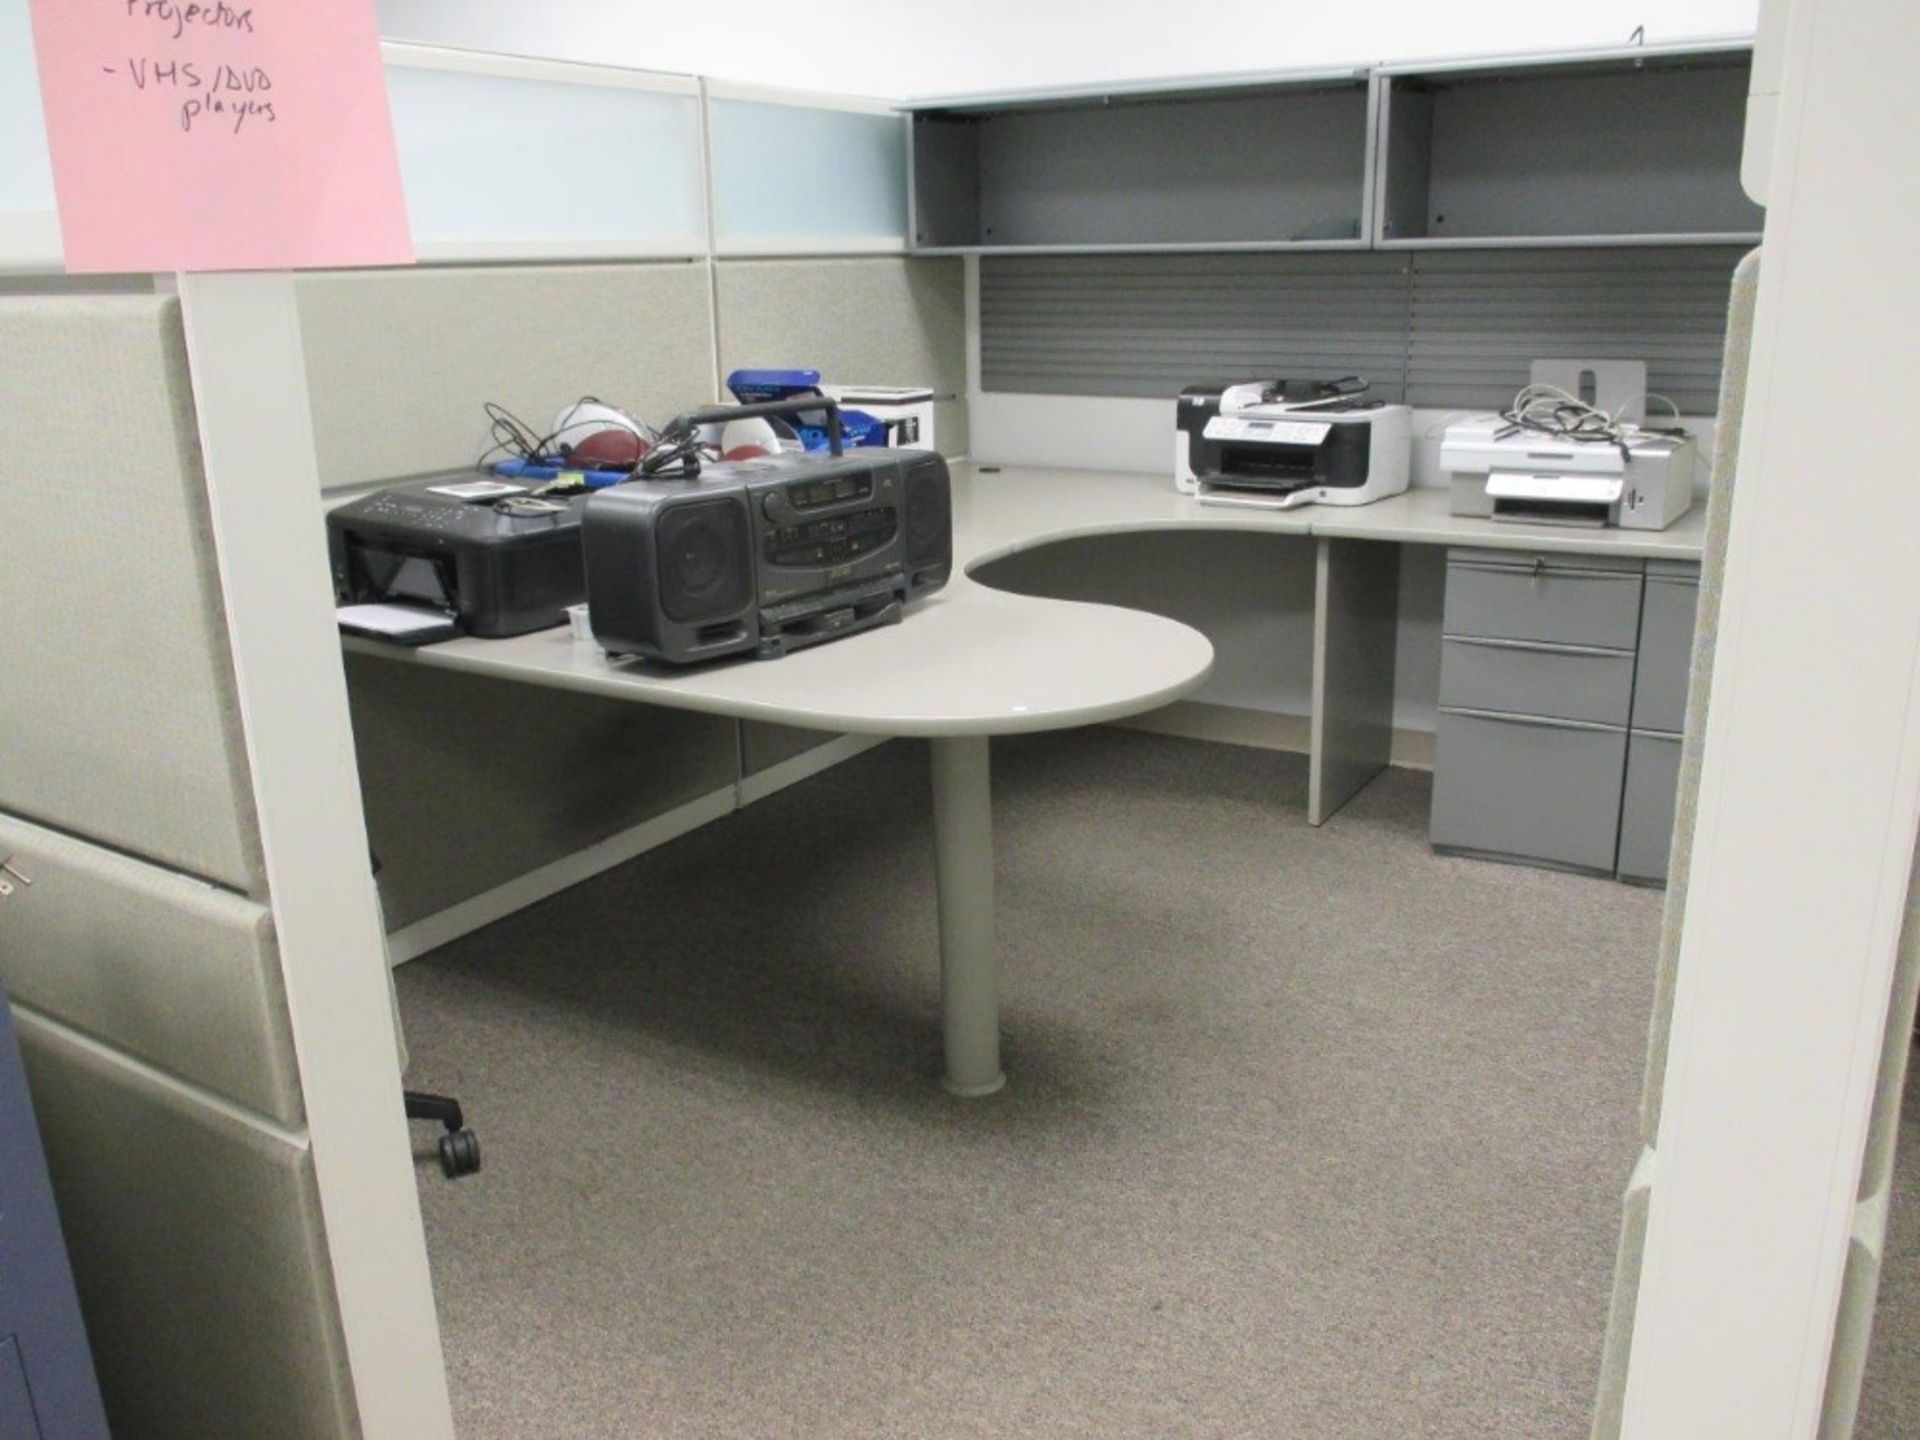 2008 Tecknion 3 Station Cubicle System - Image 3 of 4